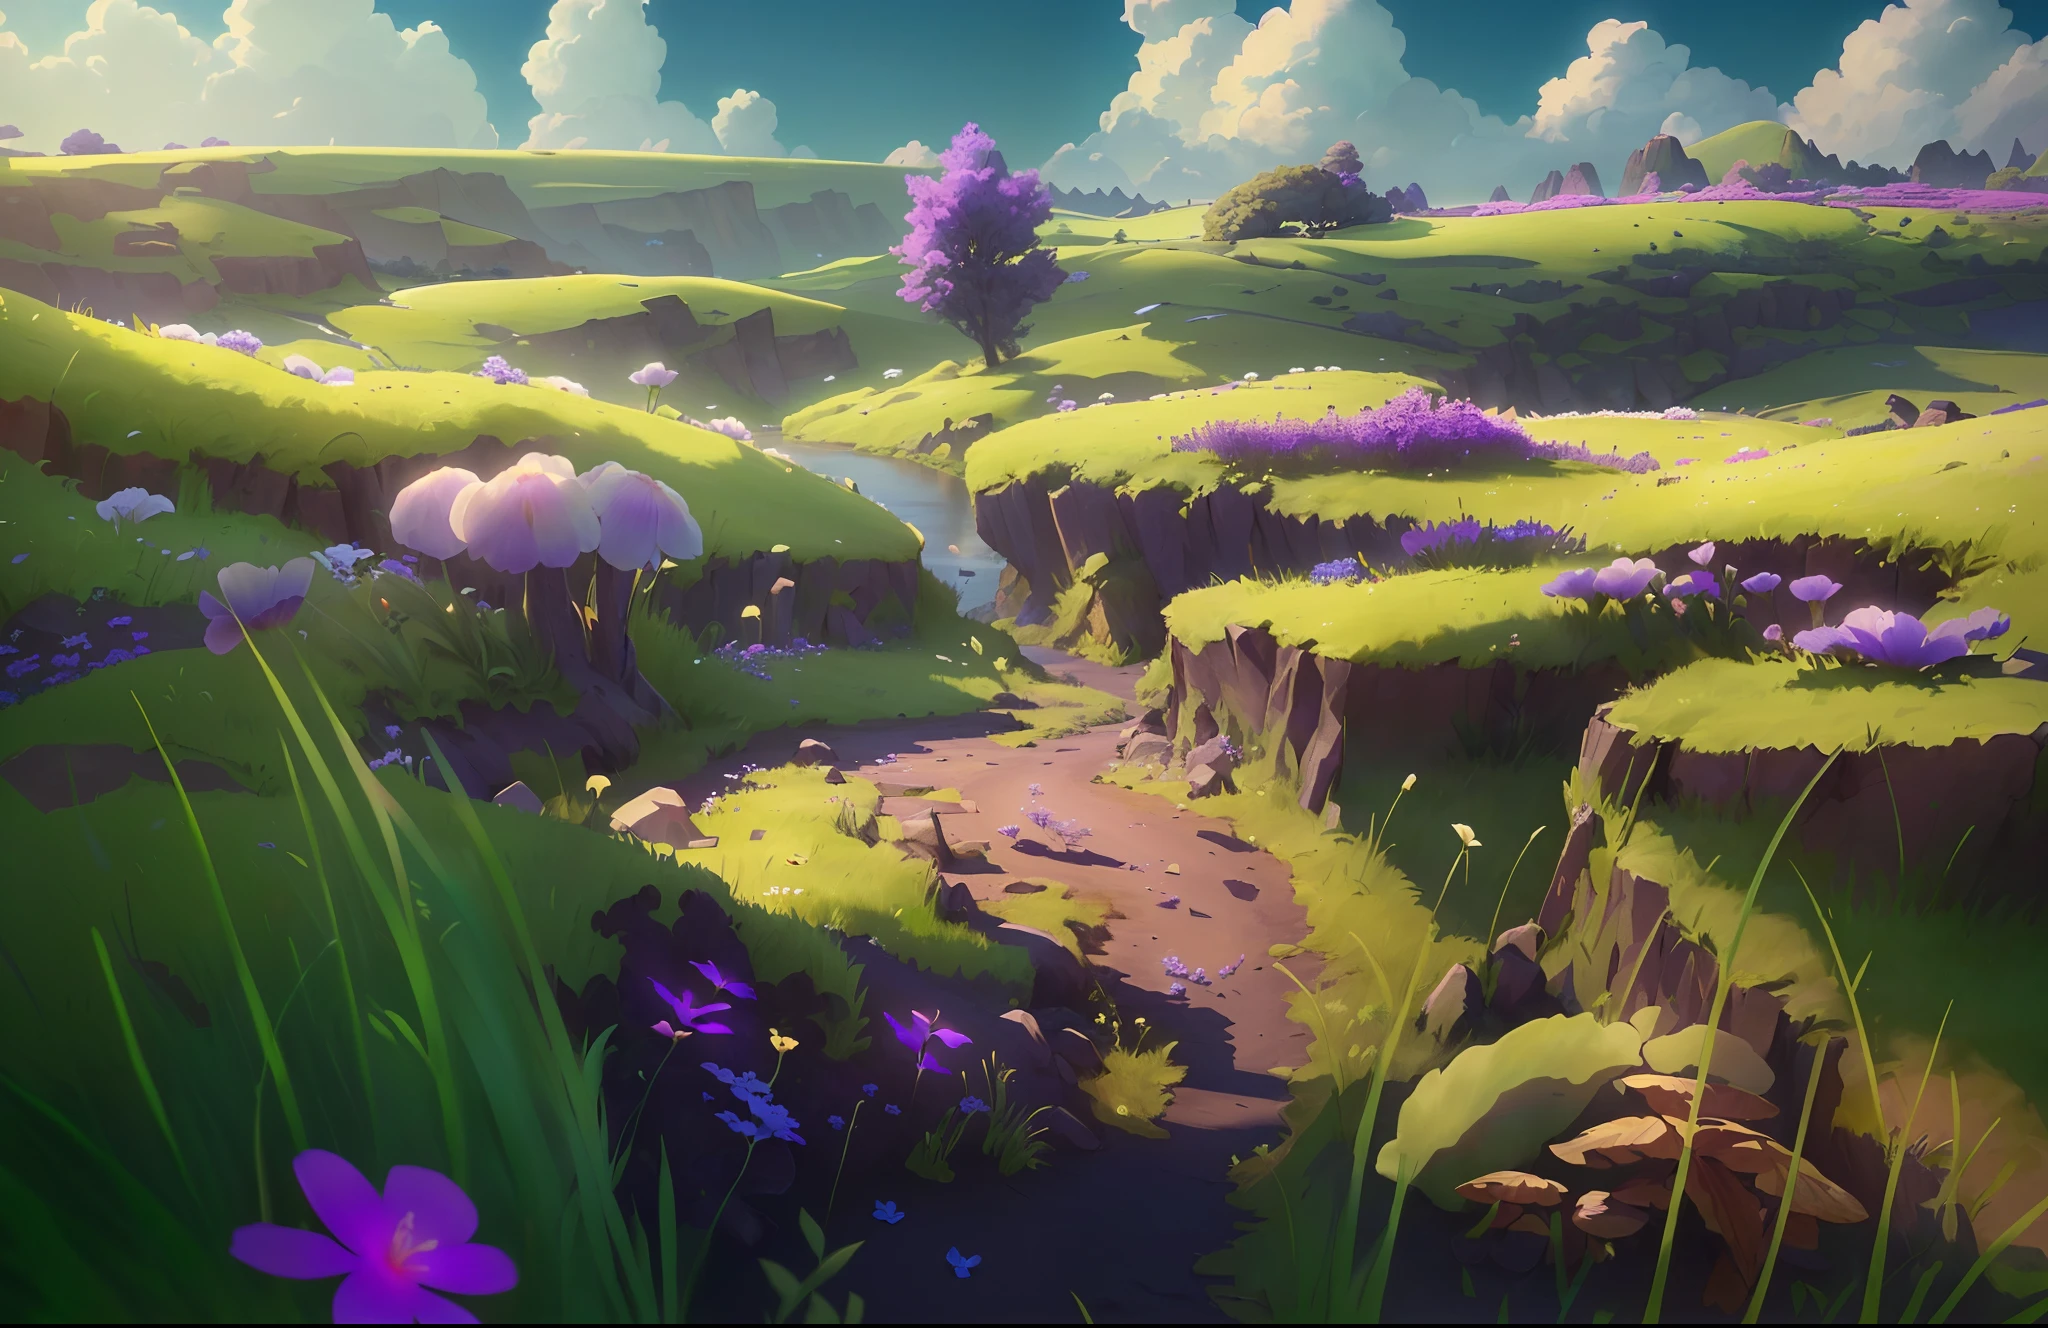 masterpiece, best quality, masterpiece,best quality,official art,extremely detailed CG unity 8k wallpaper, An exquisitely hand-drawn scene with a grassy green landscape, adorned with blooming purple flowers. The distant blue sky and fluffy white clouds provide a perfect backdrop, while the foreground features a winding dirt path.